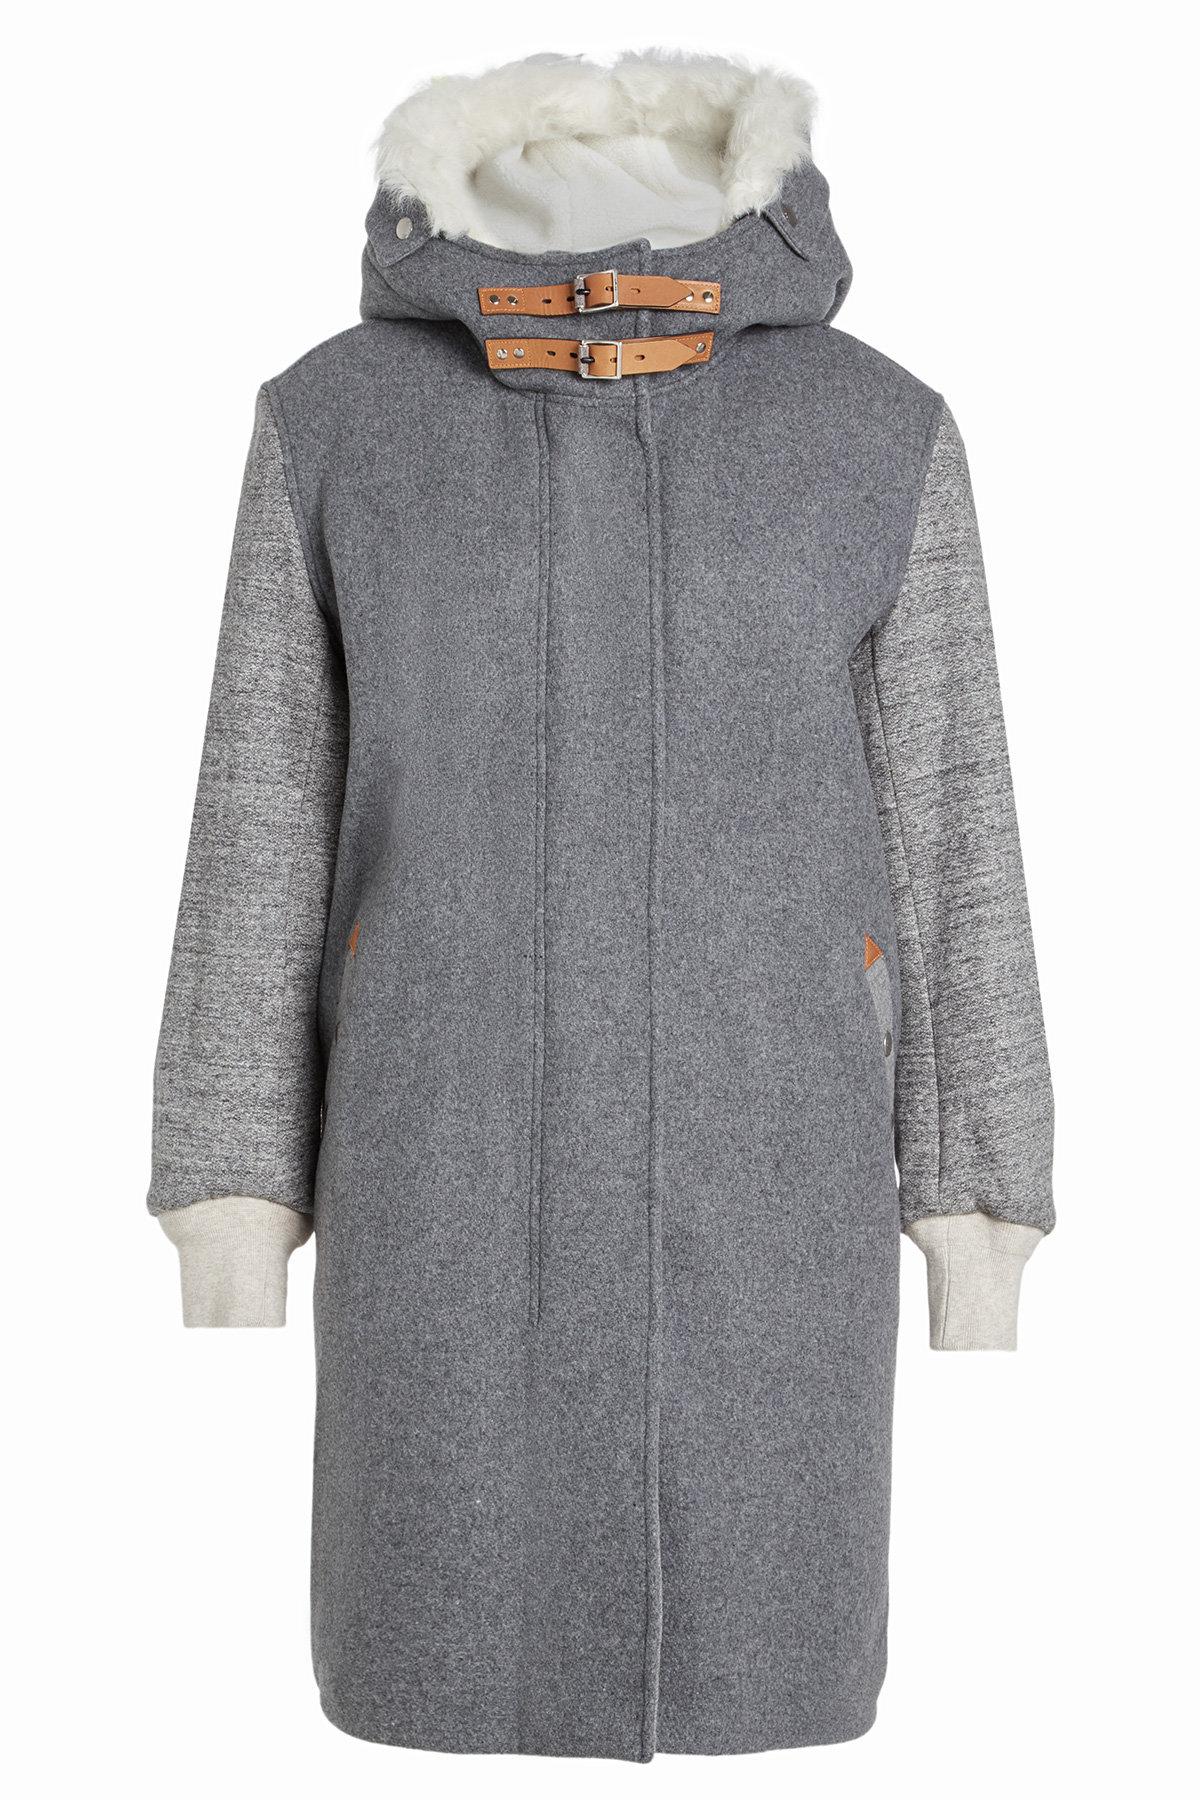 Rag & Bone Coat With Wool And Shearling In Grey | ModeSens